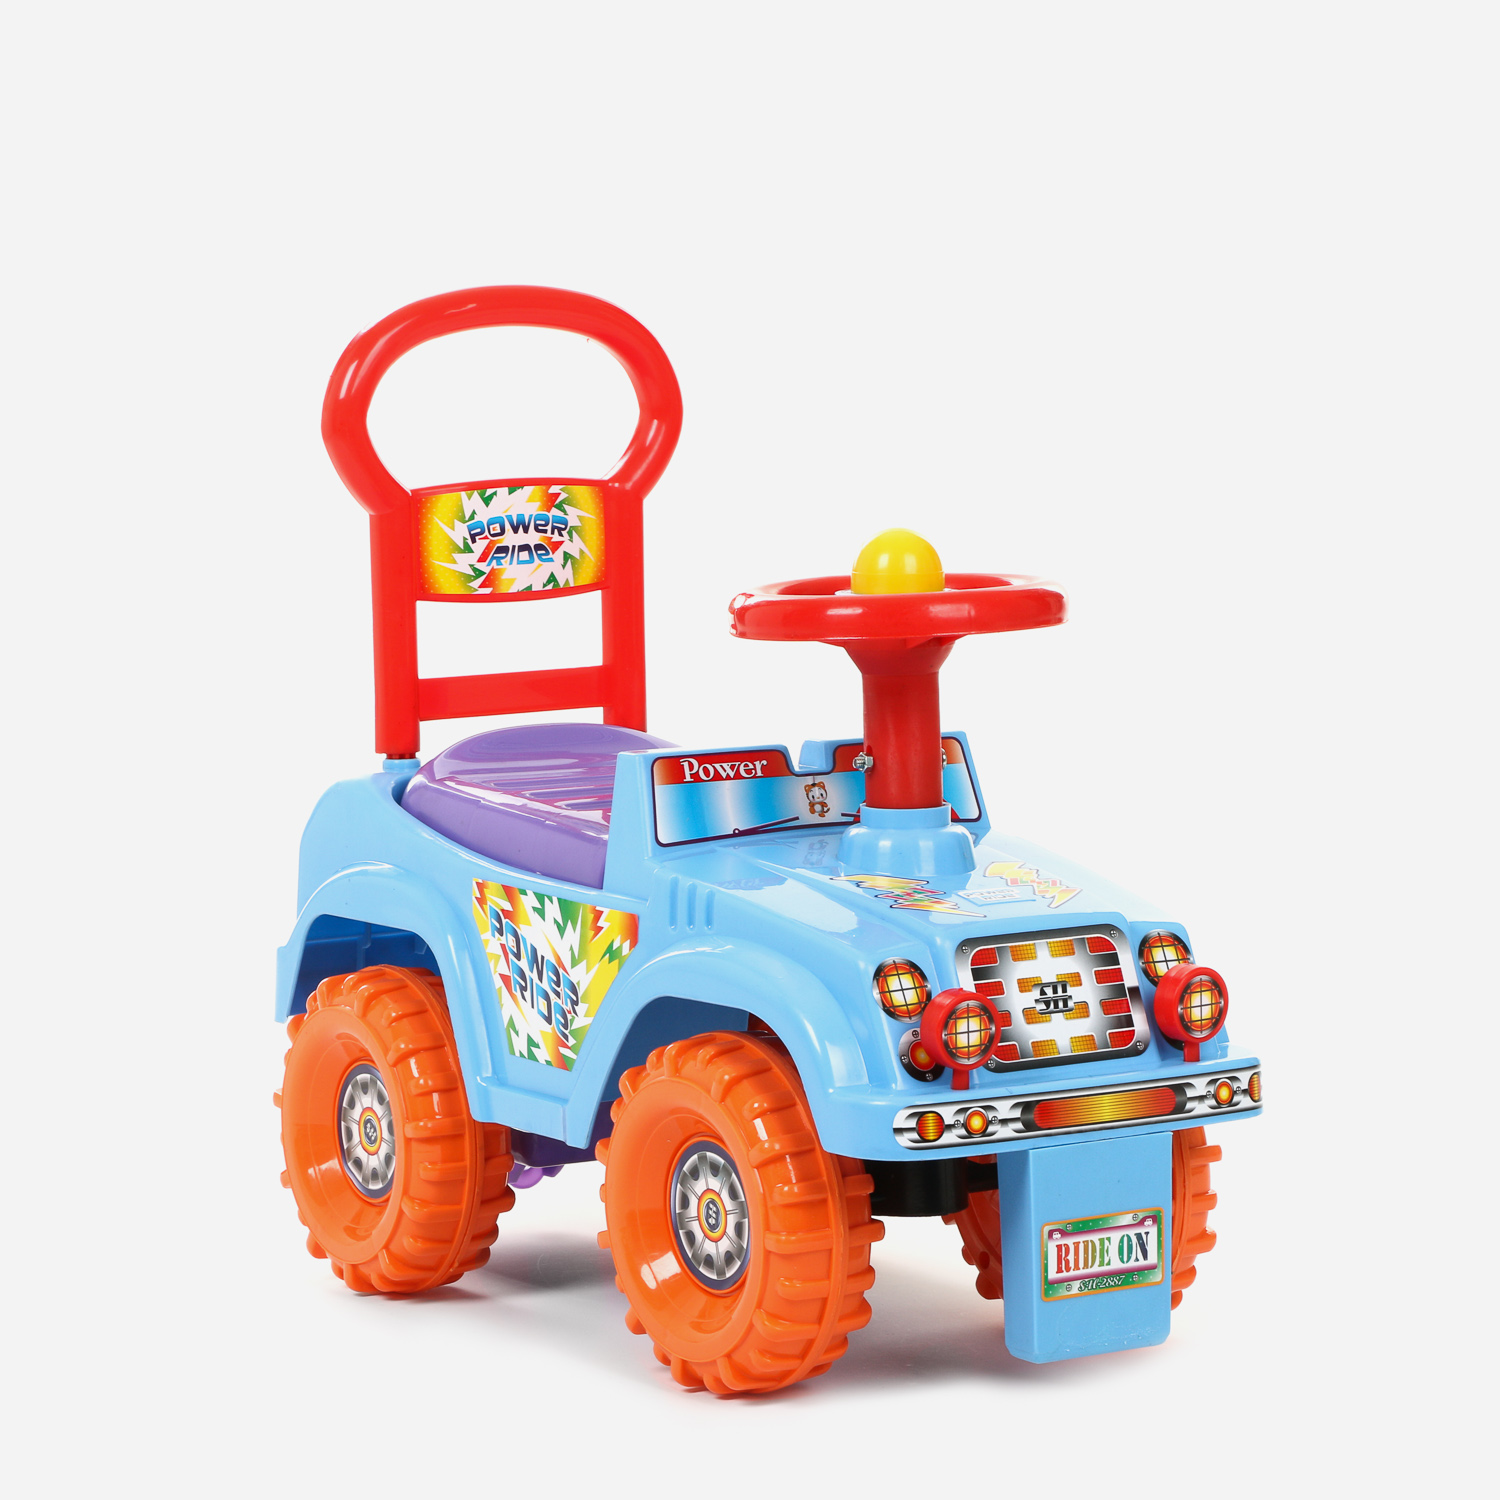 ride and play toys